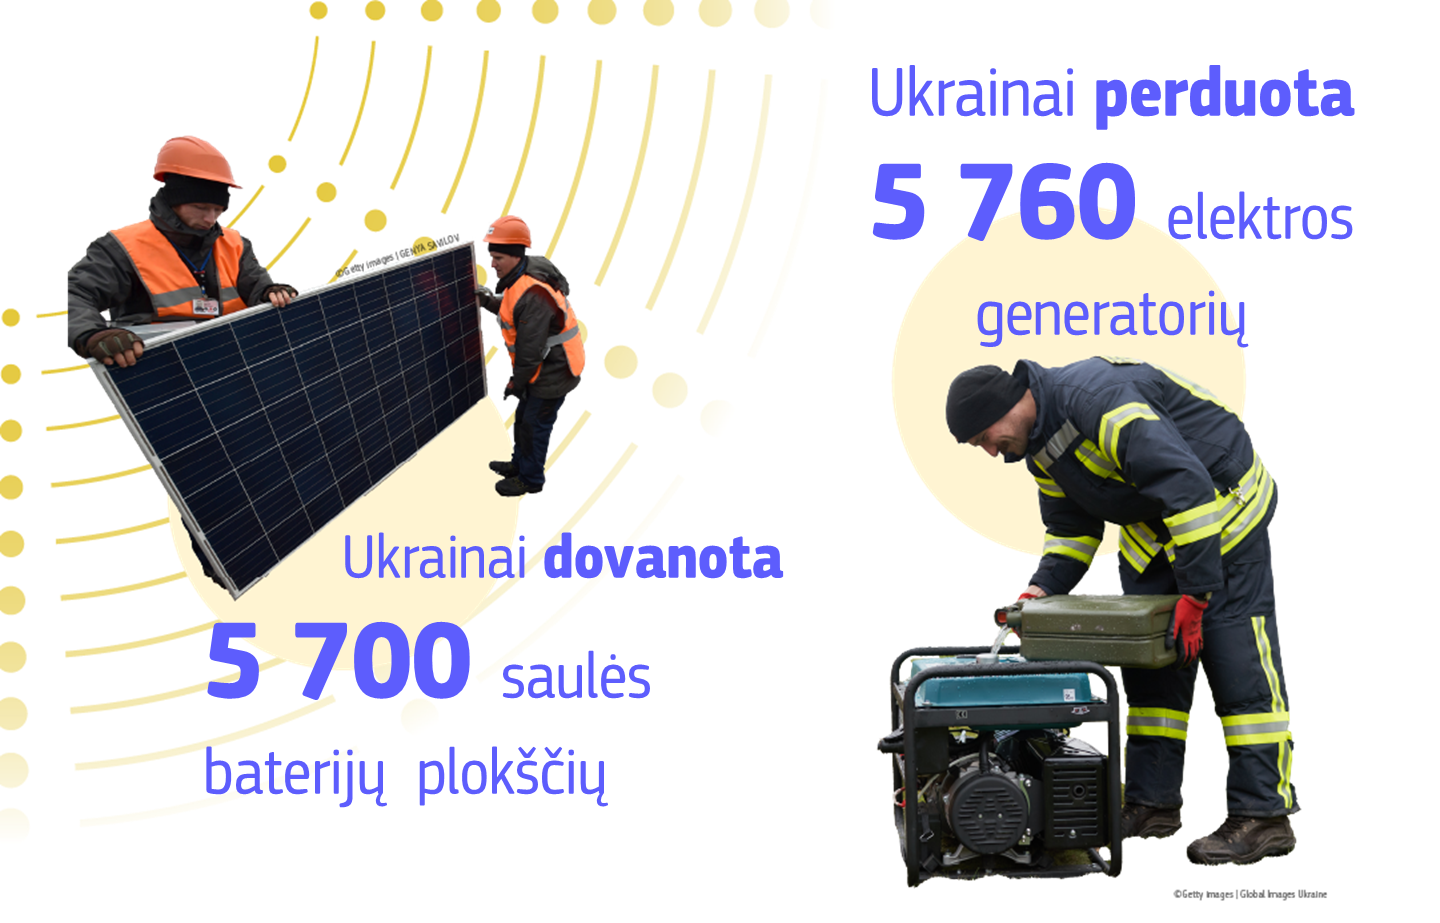 Infographic showing EU support to Ukraine's energy infrastructure